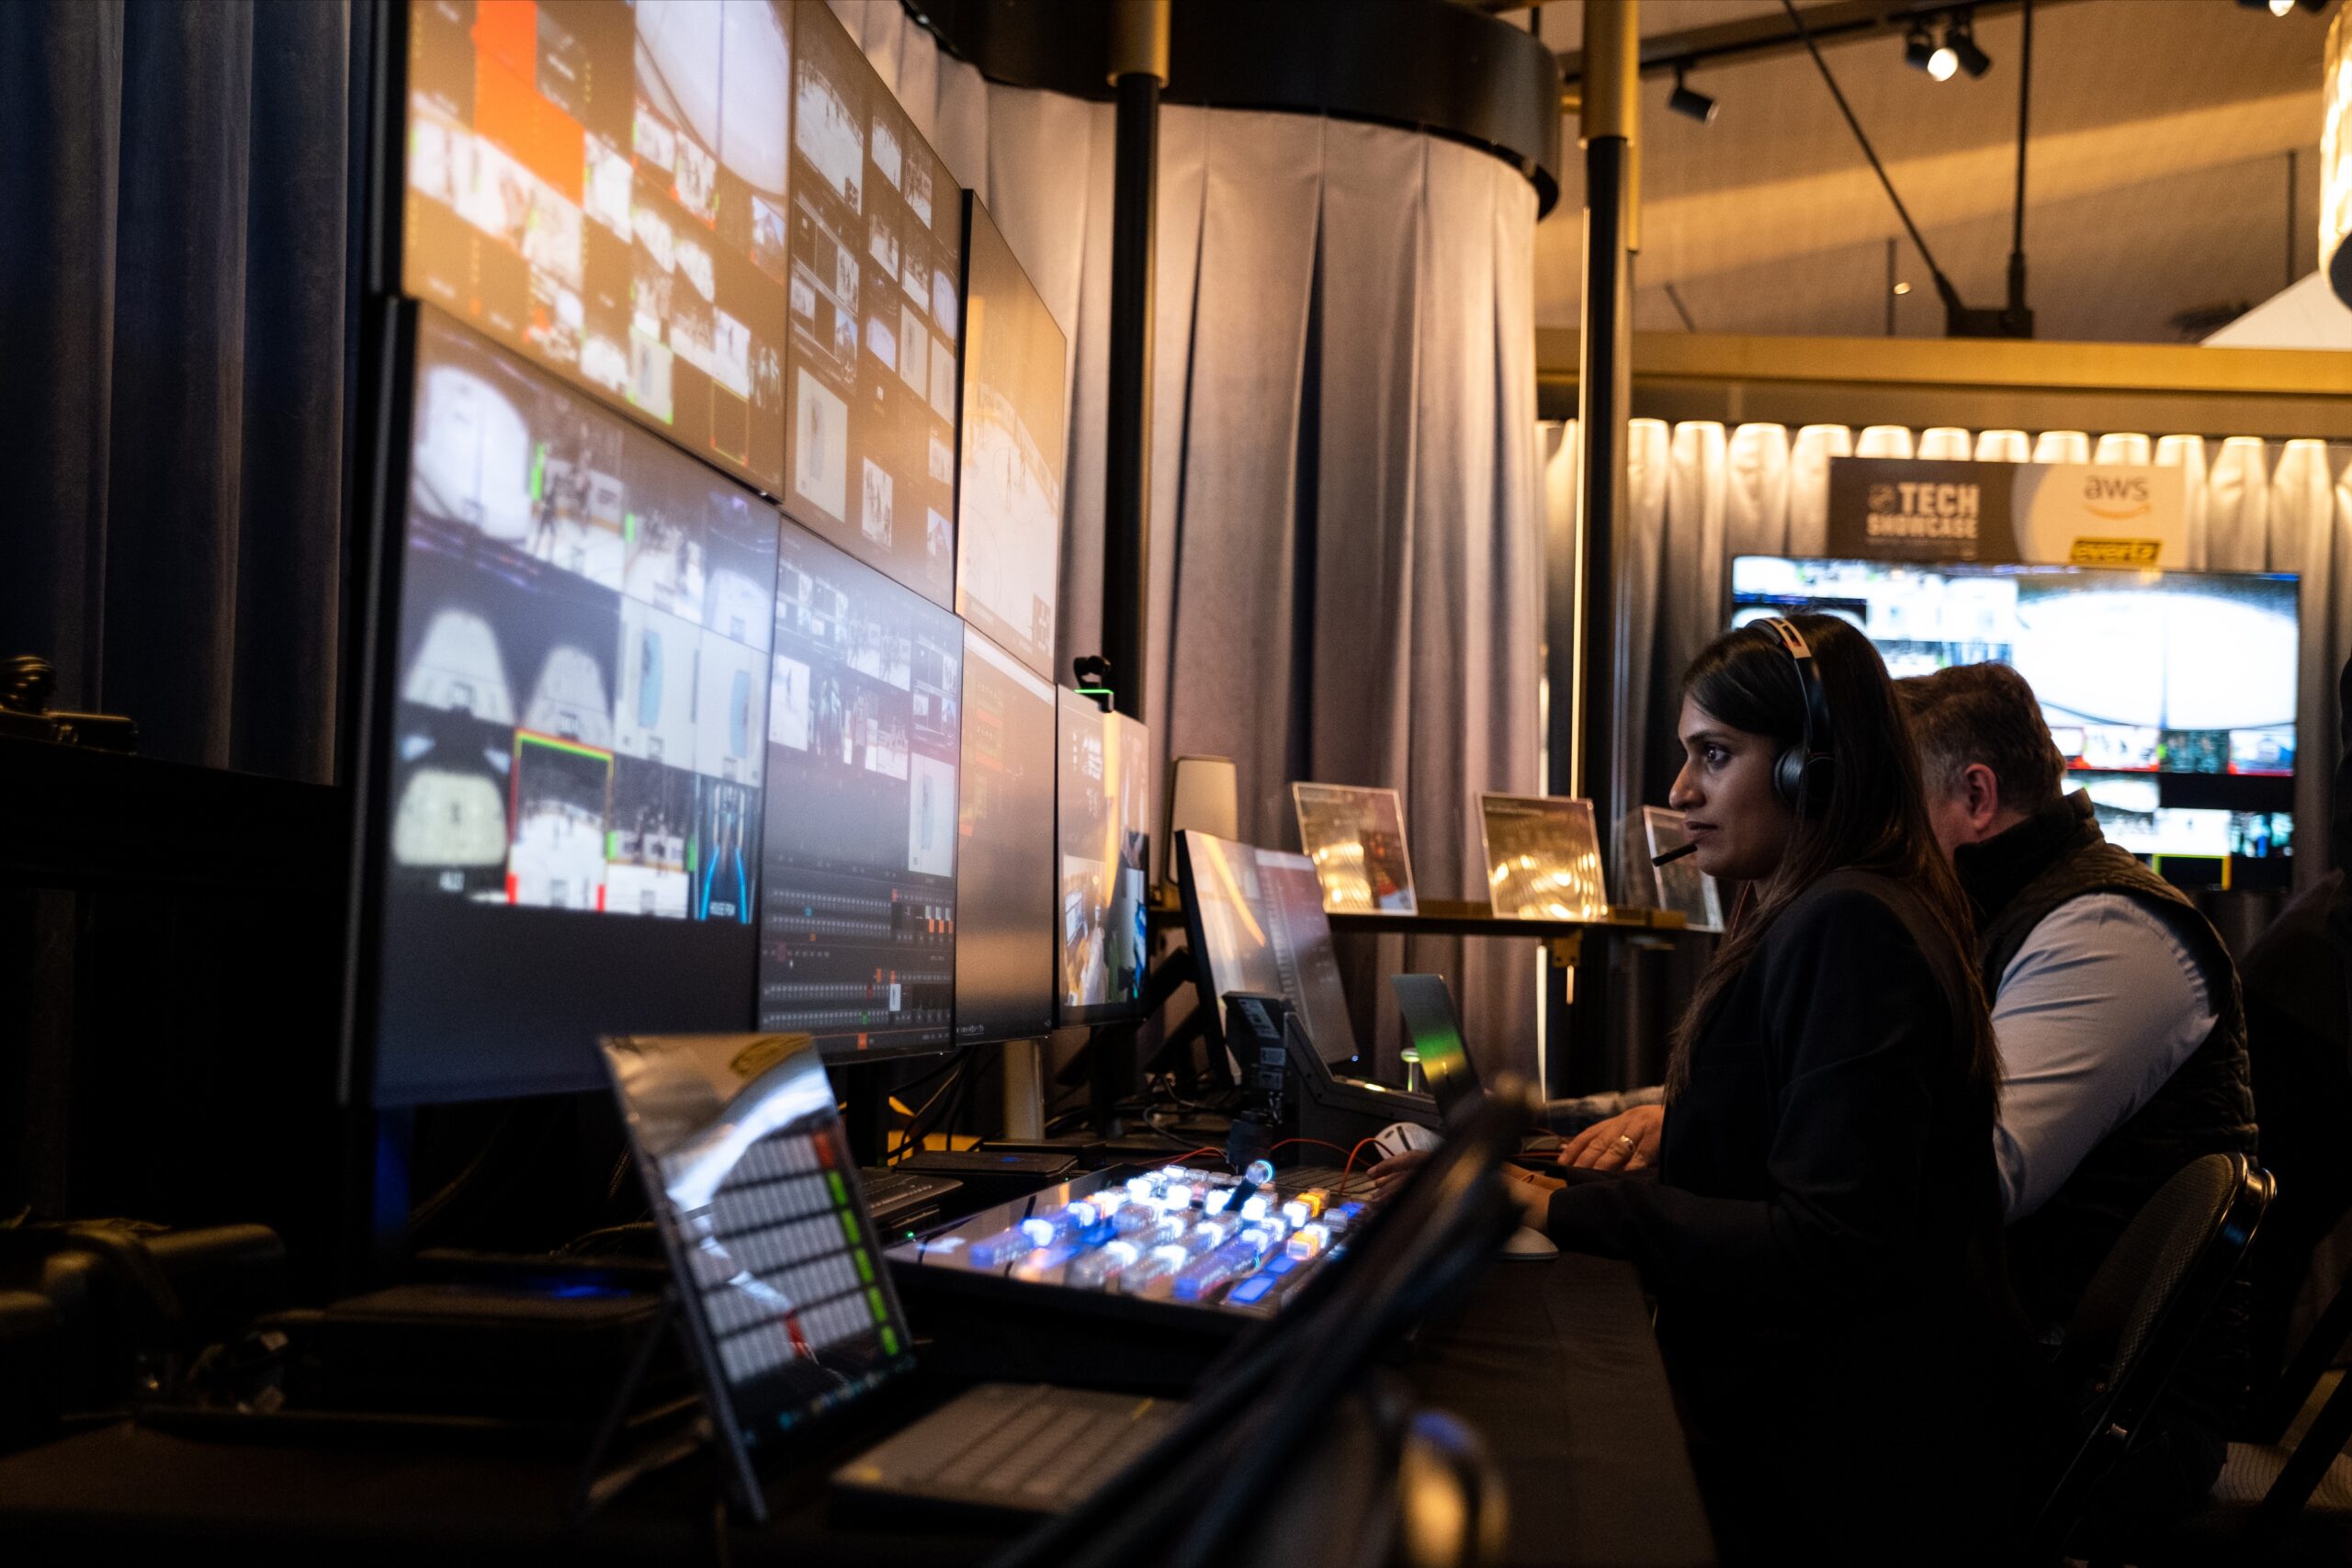 NHL Tech Showcase The Future of On-Ice Storytelling With the Cloud, Tracking 2.0, AI and ML, and More